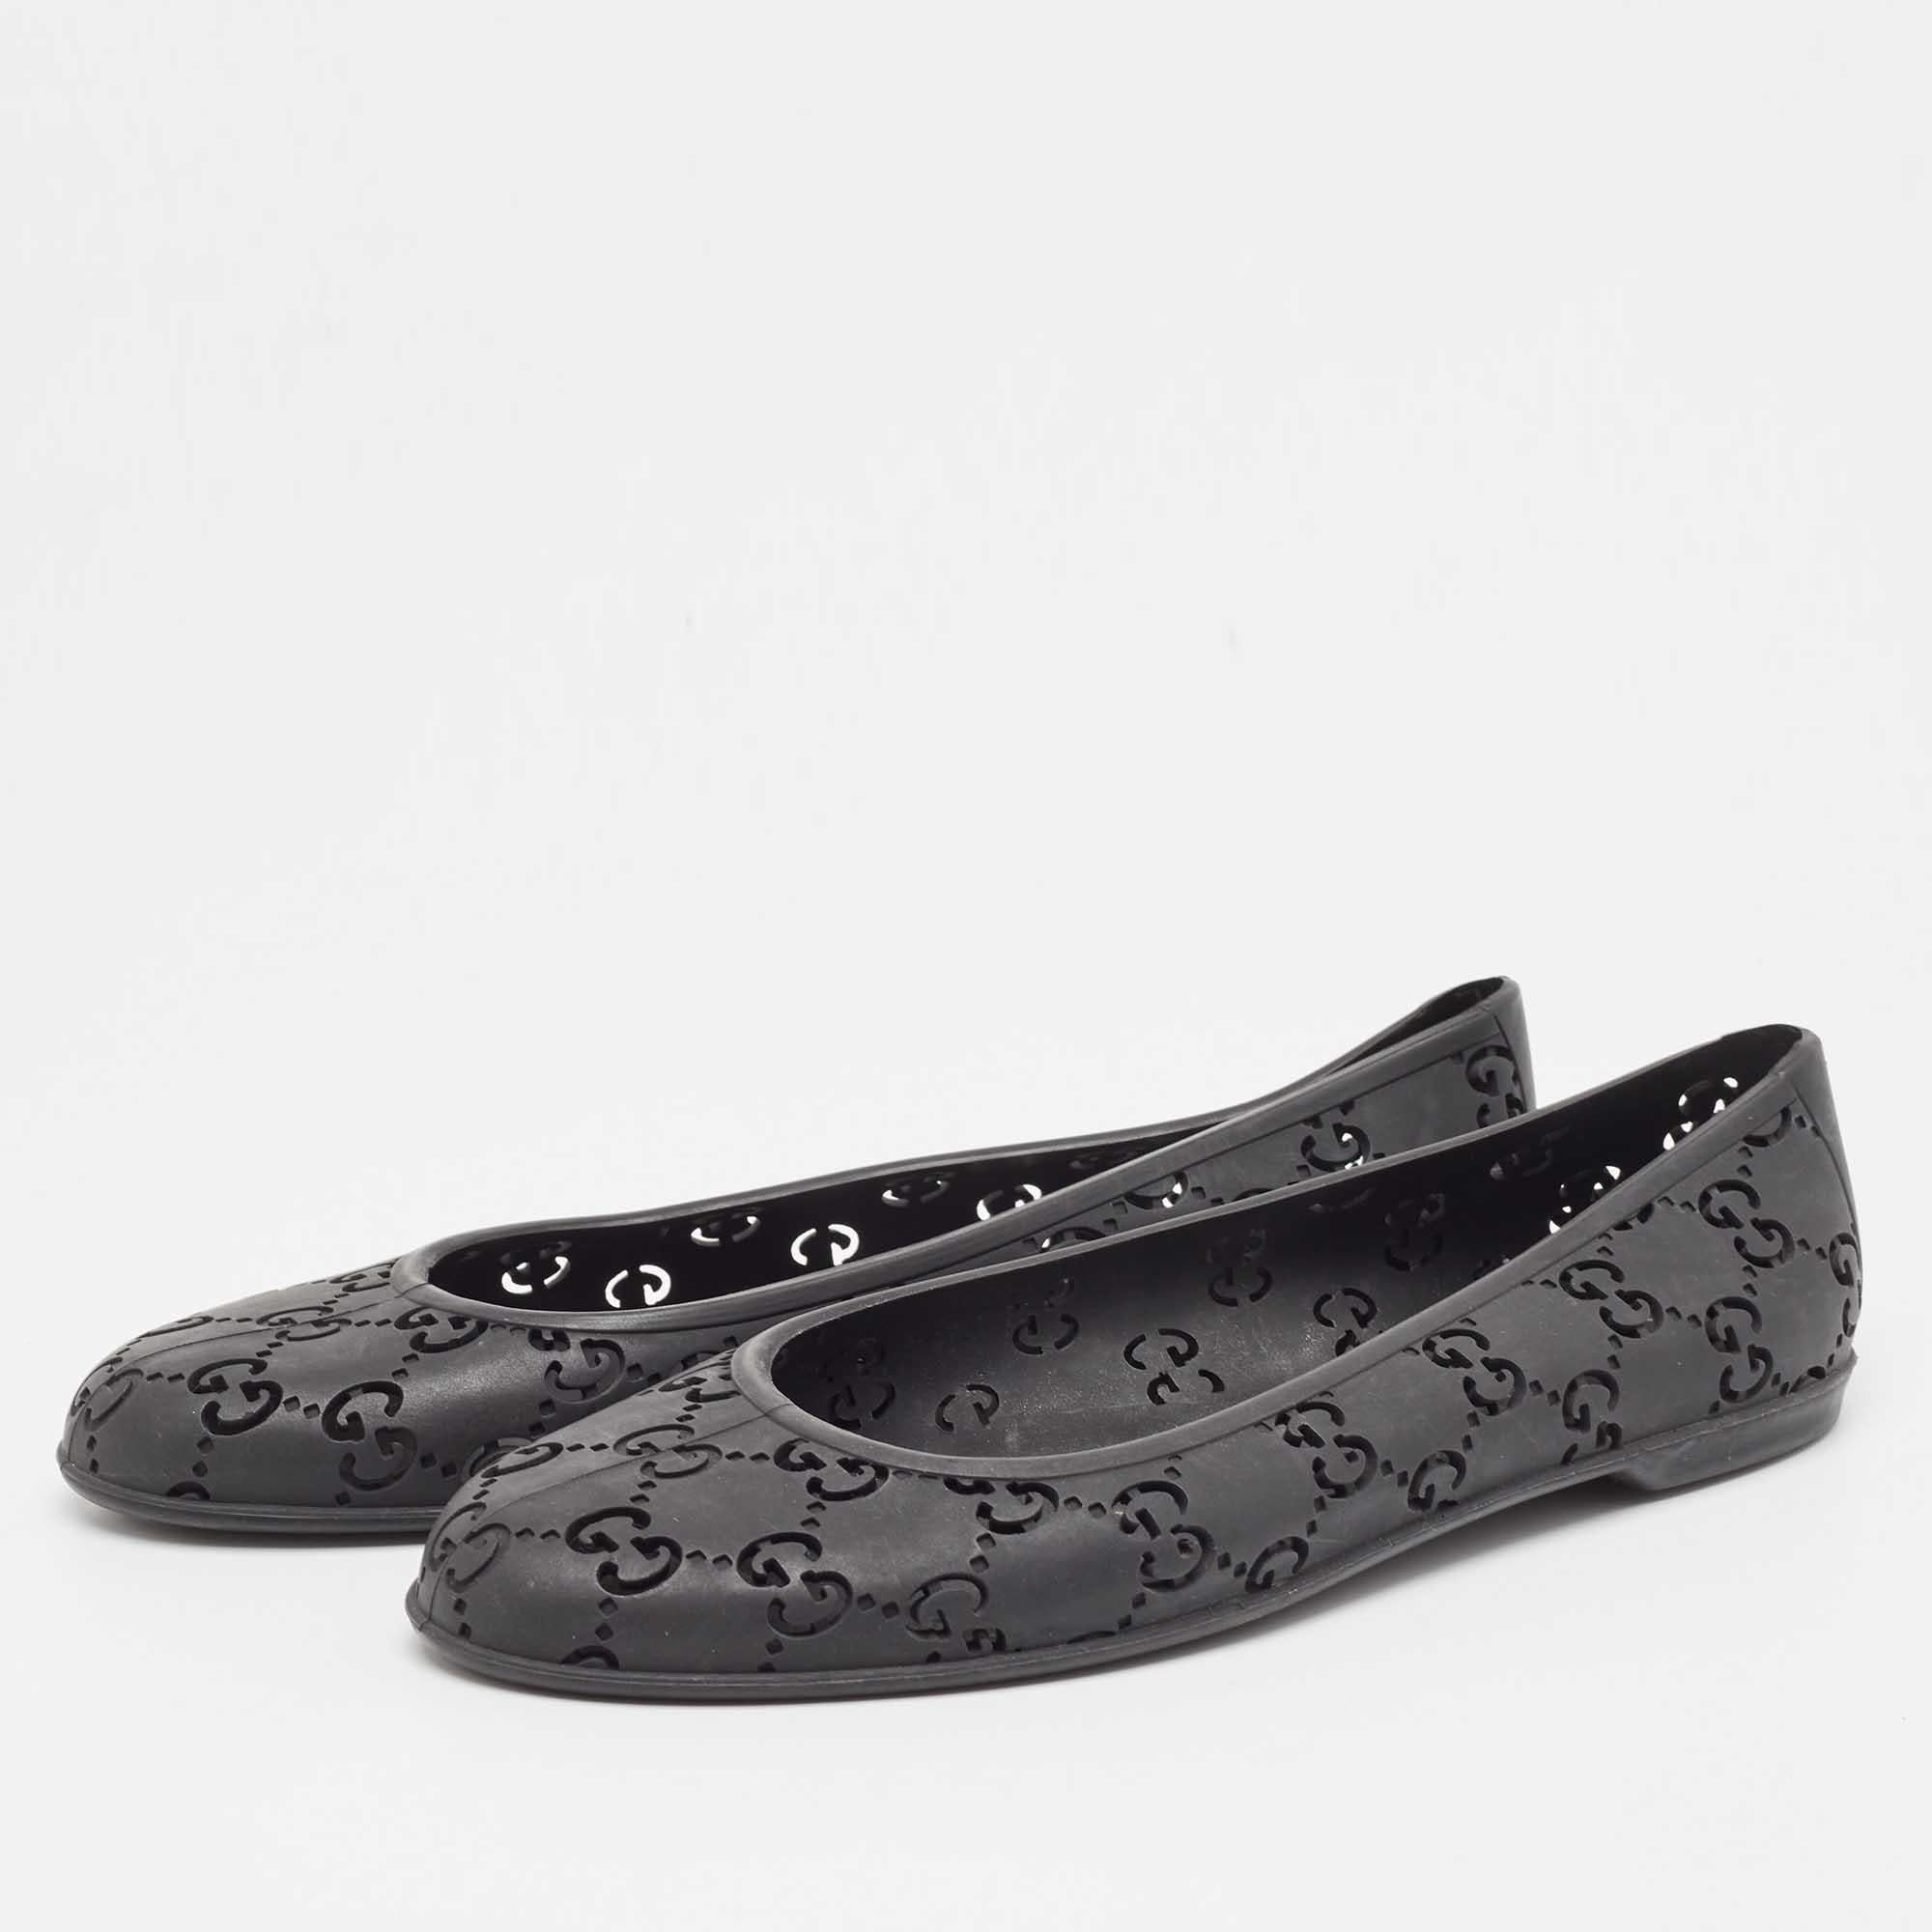 Chic and cool, these ballet flats from Gucci are crafted with a rubber body detailed with black 'GG' web detailing on it. This pair features a durable interior and looks equally flattering with dresses and trousers.

